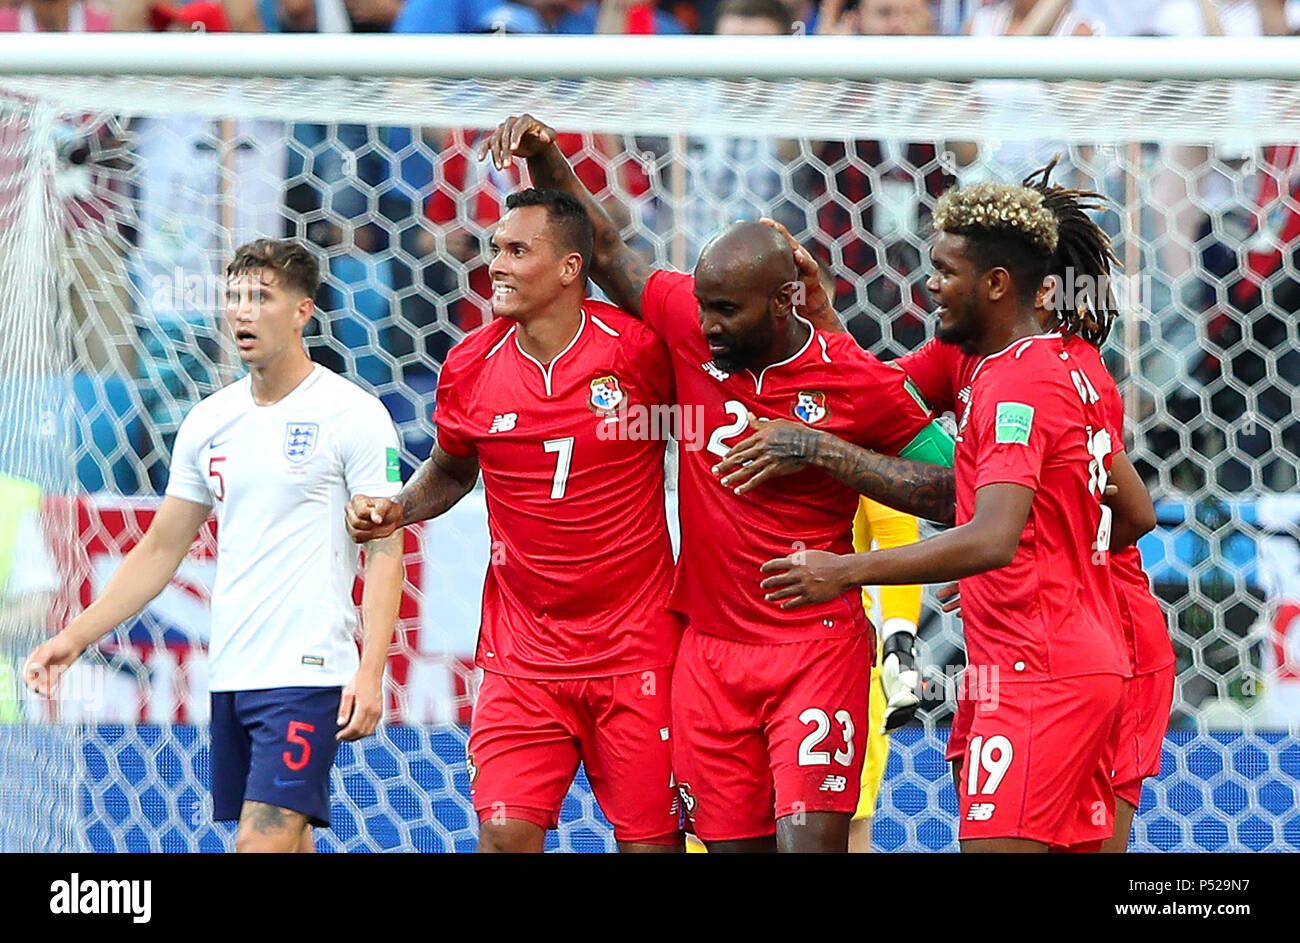 Nijni Novgorod, Russia. 24th June, 2018:ENGLAND VS. PANAMA - Felipe Baloy of Panama celebrates after scoring the first goal of Panama in the history of the World Cups during a match between England and Panama valid for the second round of group G of the 2018 World Cup, held at the Nizhny Novgorod stadium in the city of Nihzny Novgorod, Russia. (Photo: Rodolfo Buhrer/La Imagem/Fotoarena) Credit: Foto Arena LTDA/Alamy Live News Stock Photo